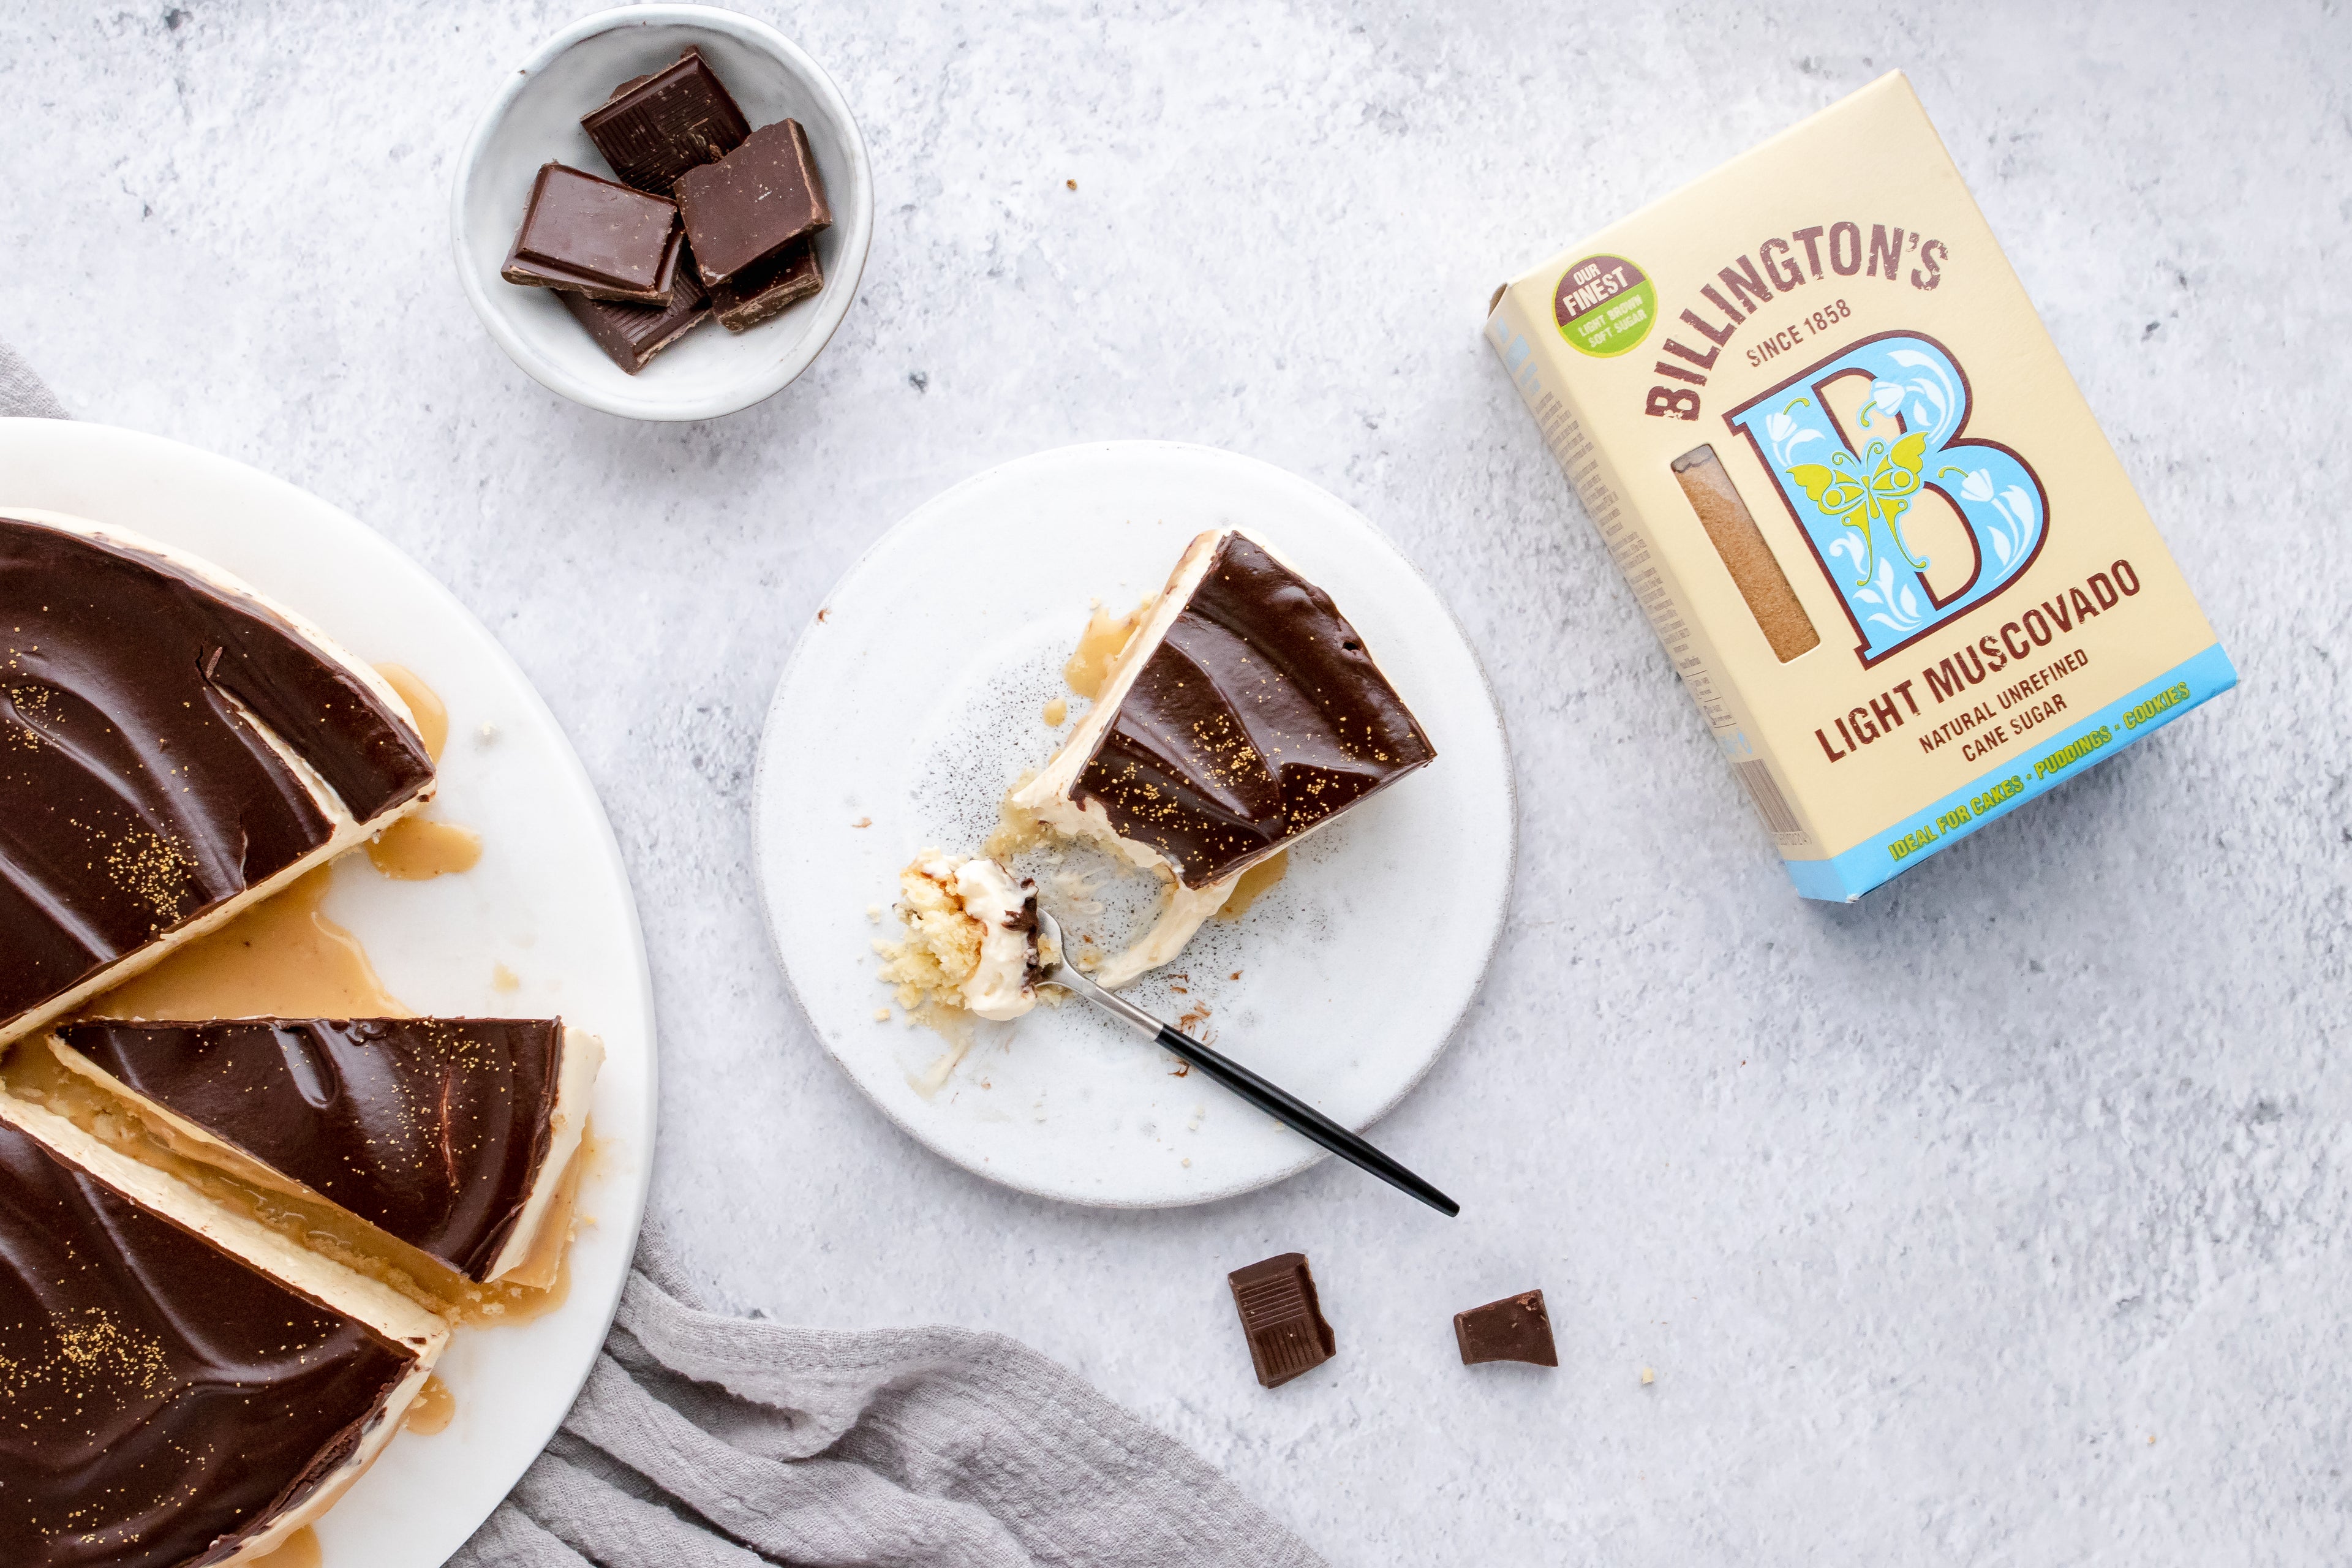 Millionaire's Cheesecake slice with a fork taking a piece out of it. Bowl of chocolate pieces and a box of Billington's Light Muscovado sugar